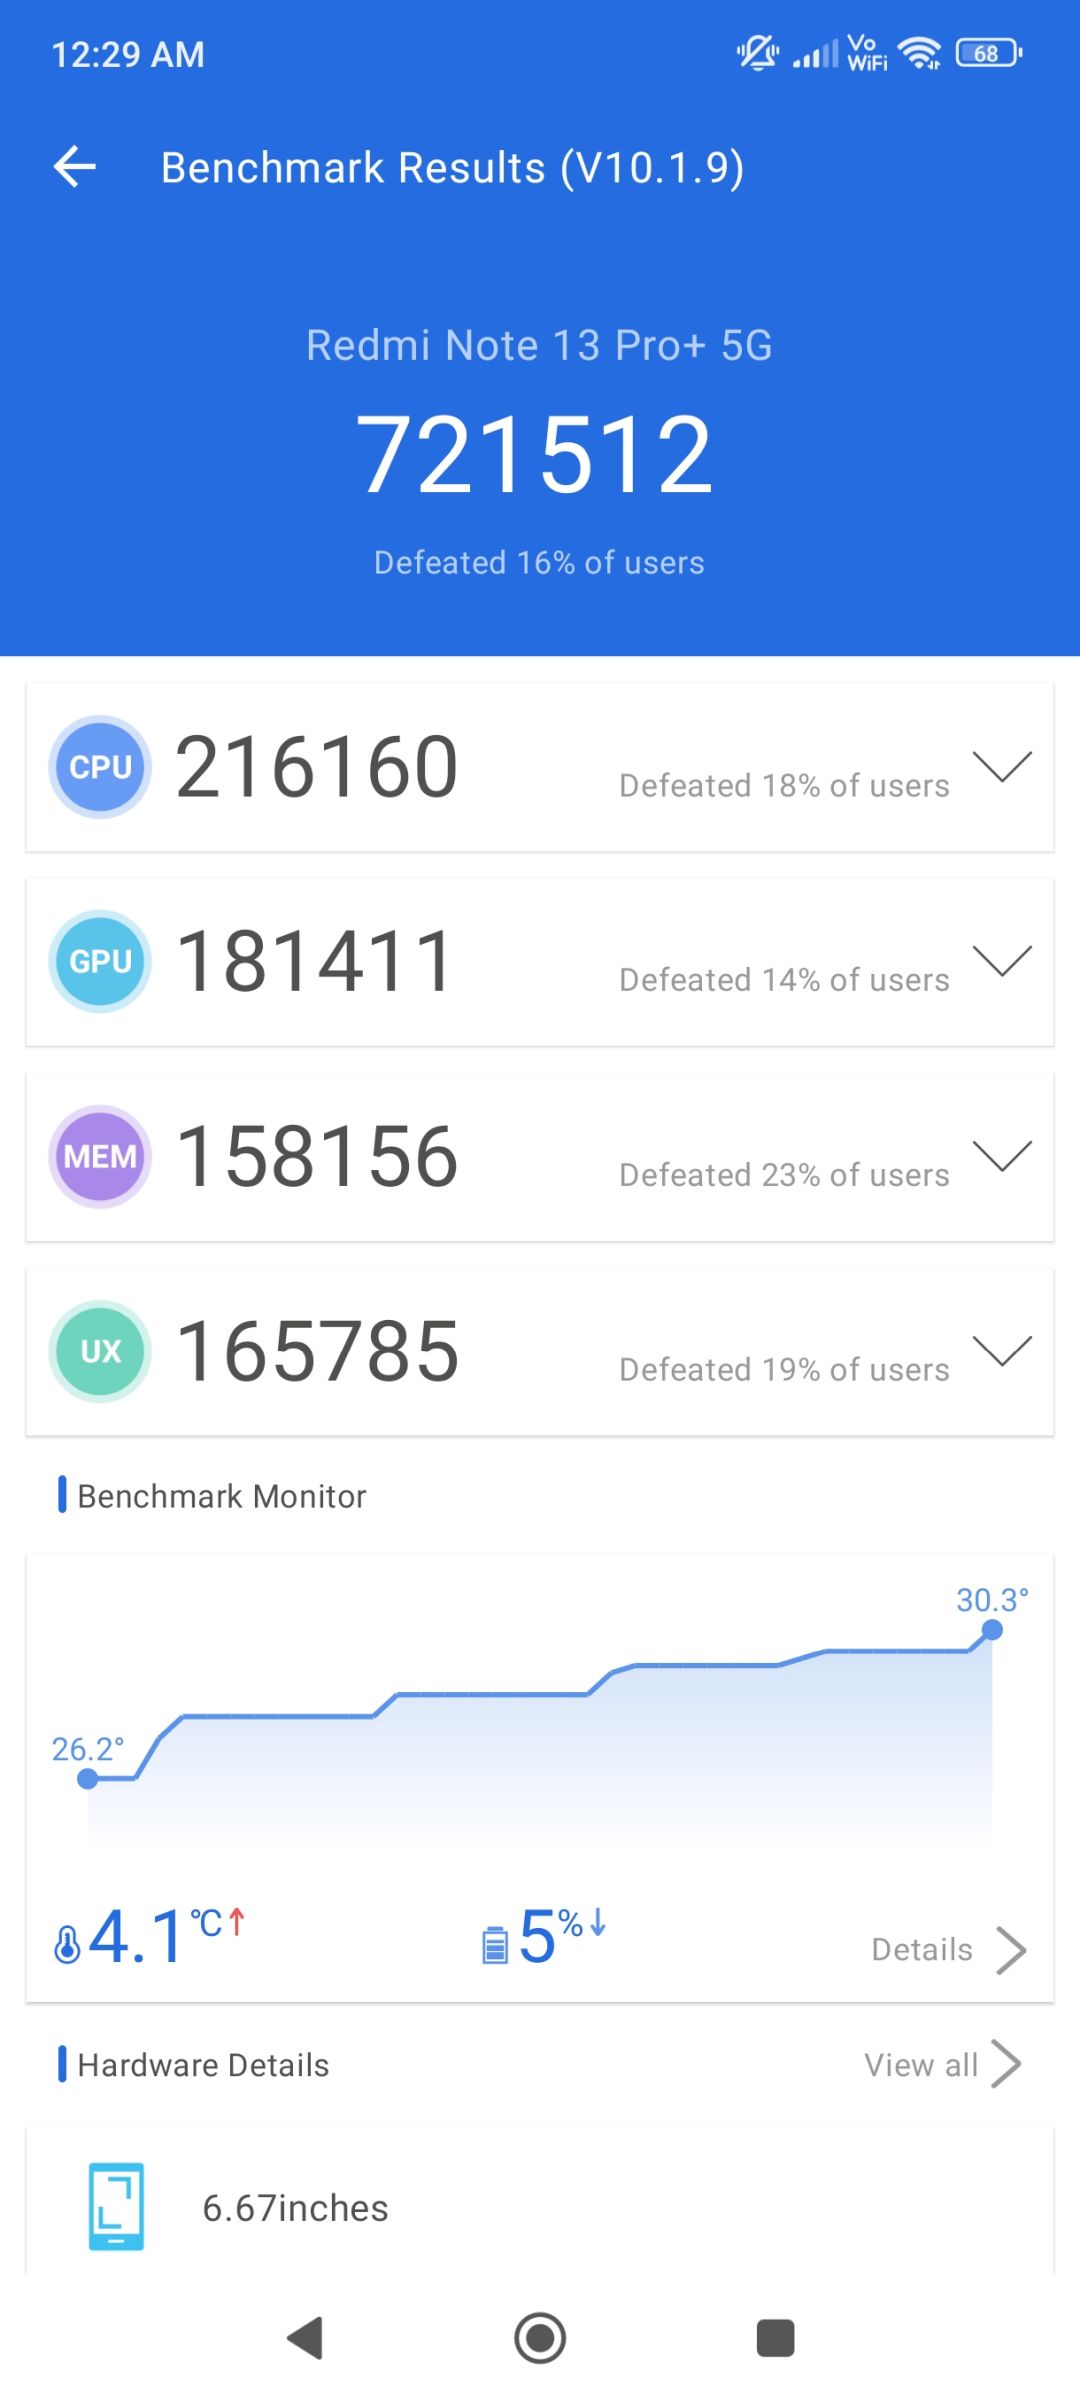 Redmi Note 13 Pro+ 5G Benchmarks Images